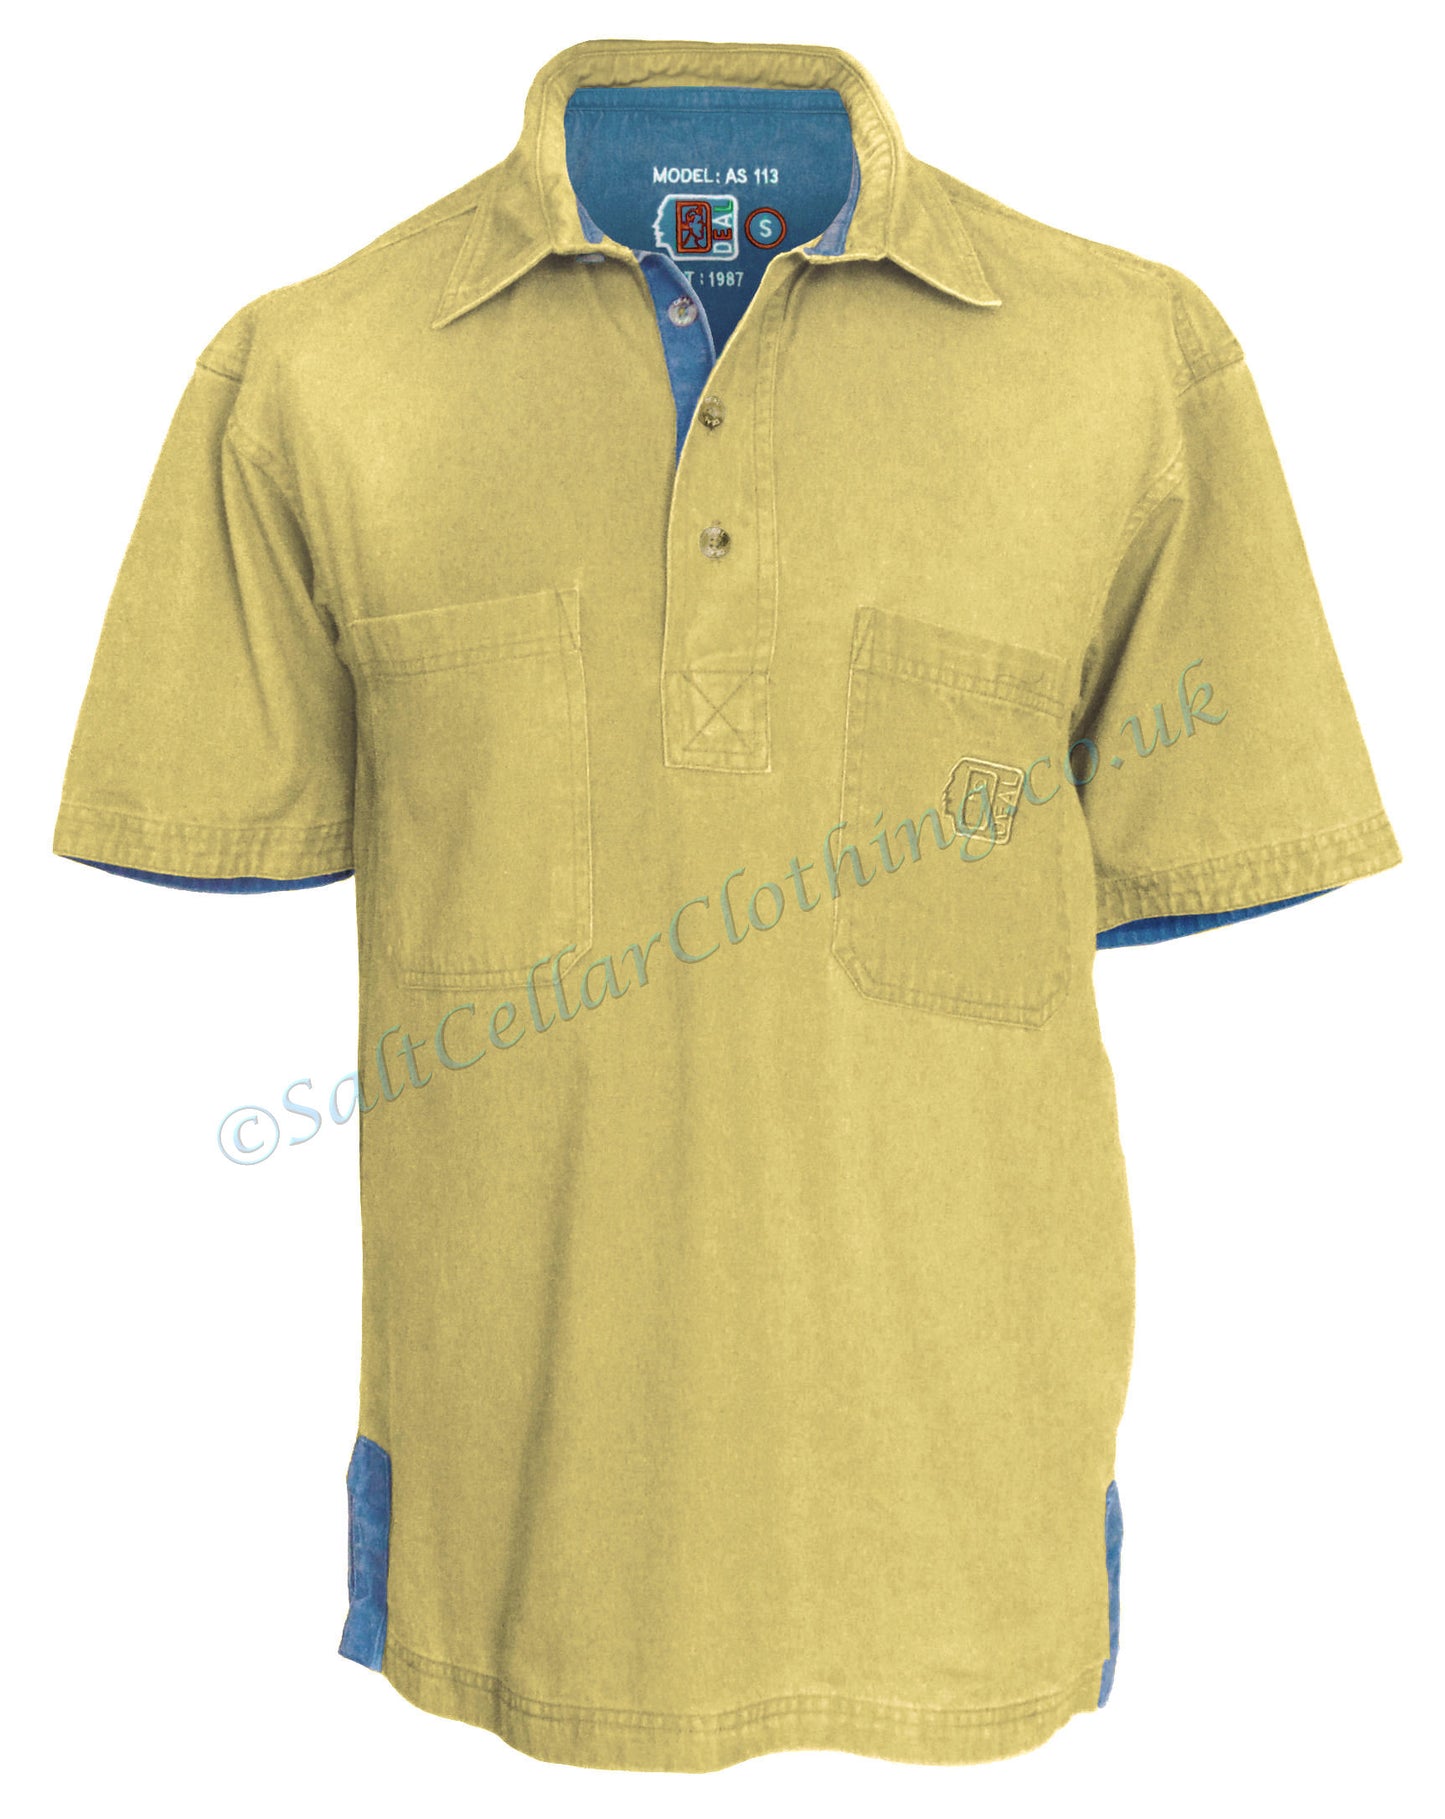 Deal Clothing Mens 'AS113' Short-Sleeved Pullover Shirt - Sand